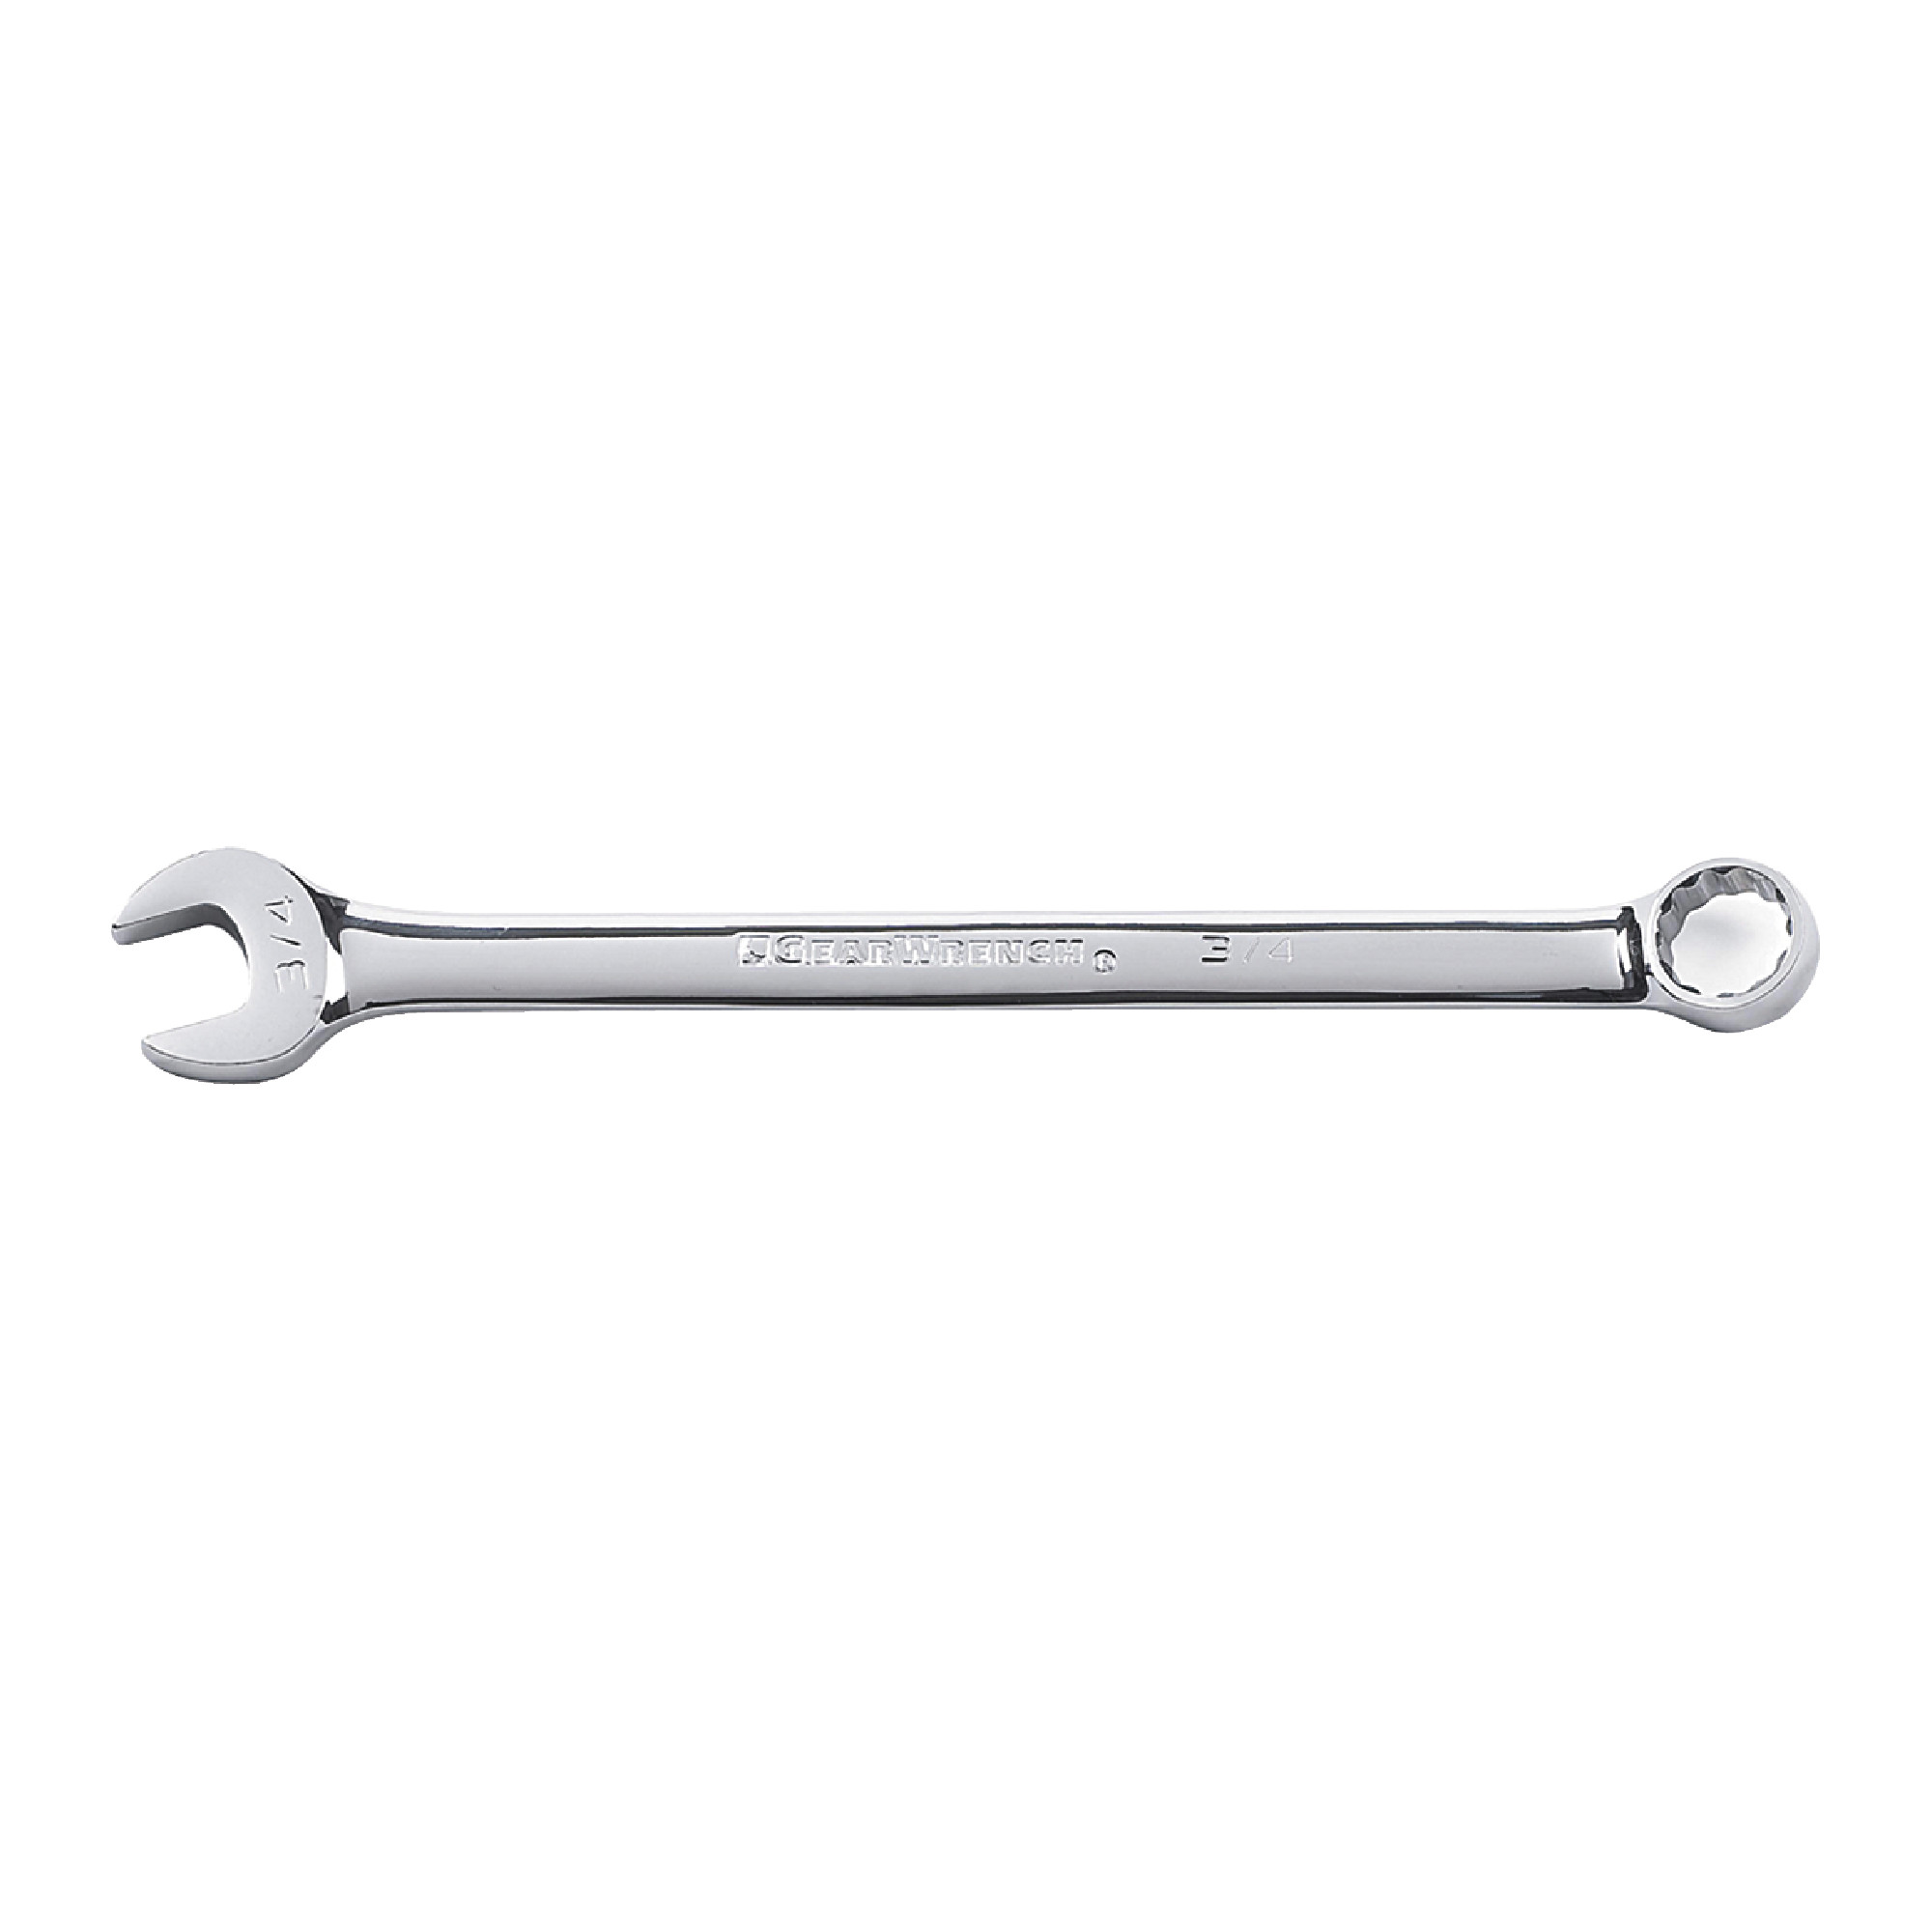 21mm 12 Point Long Pattern Combination Wrench